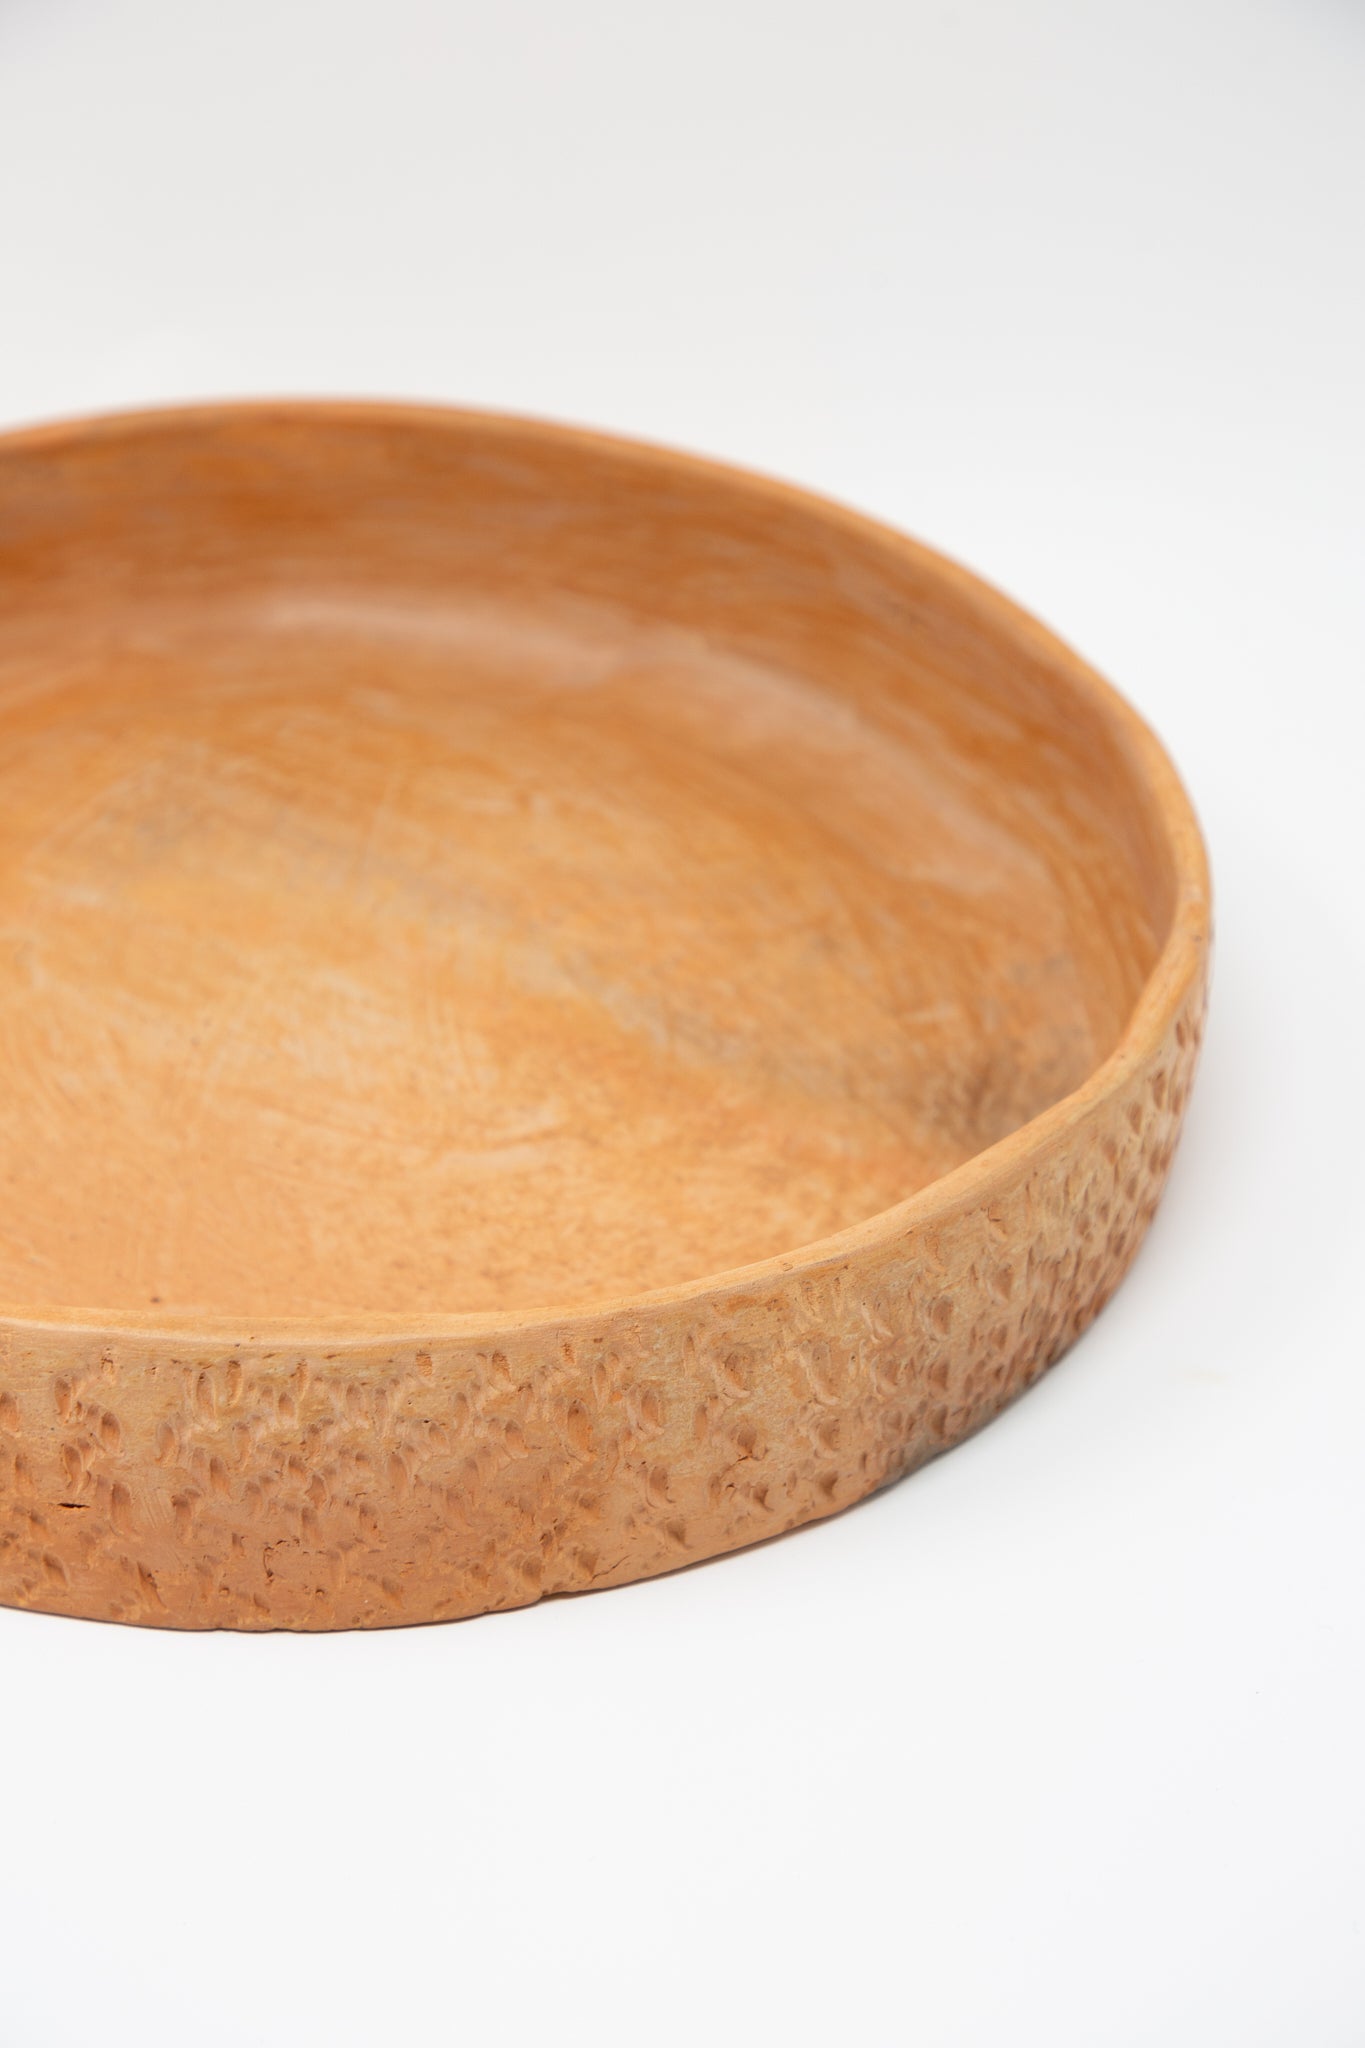 A Julia Frutero Platter in Red Clay from Plaza Bolivar, a rustic bowl with a terracotta red clay finish, is placed on a white surface.